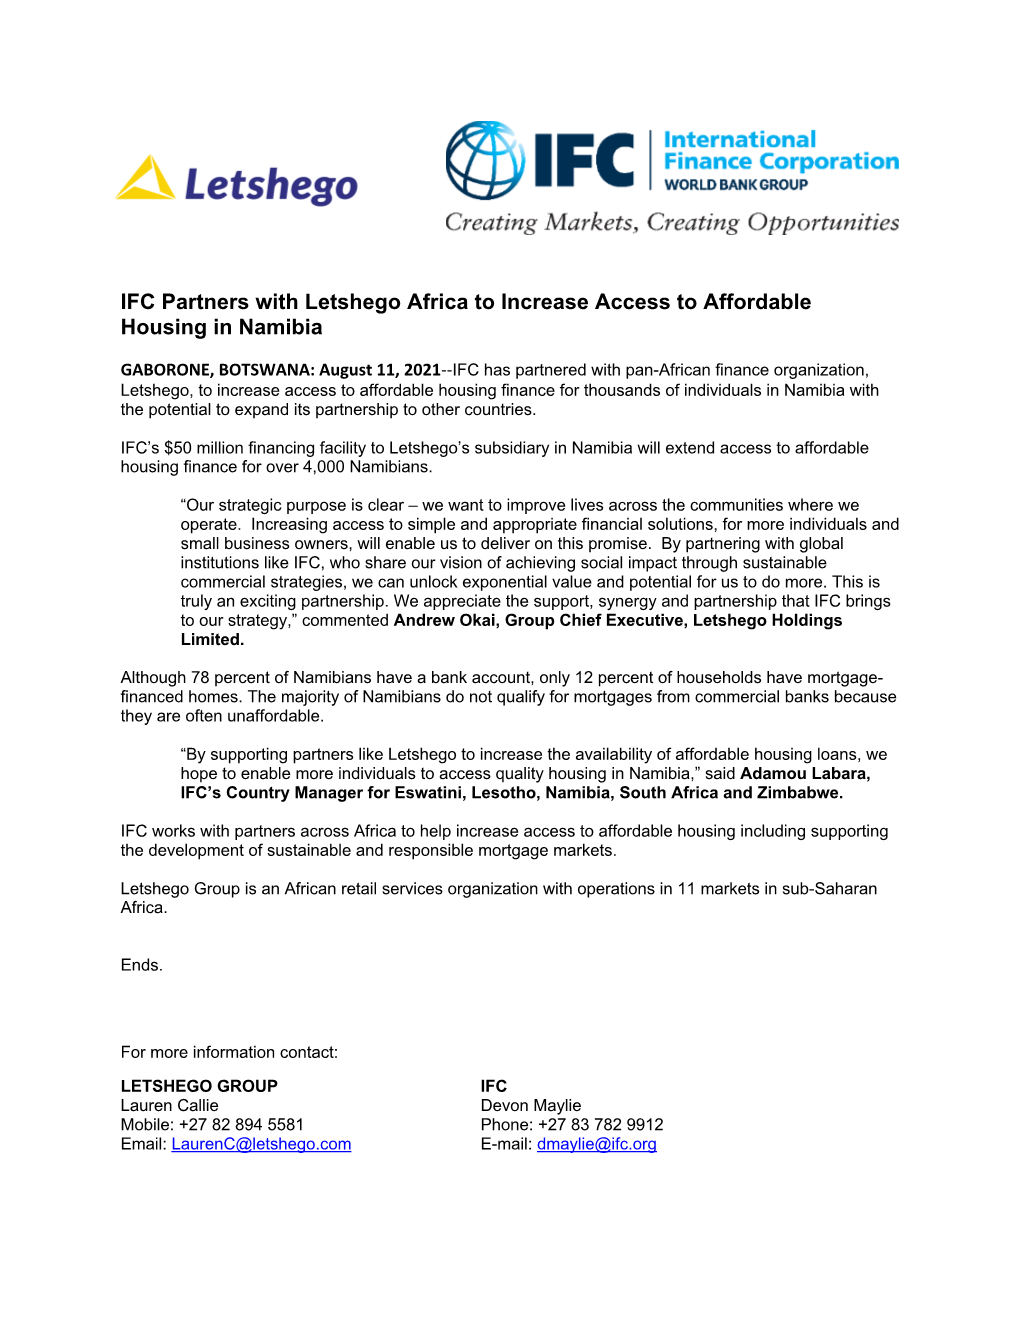 IFC Partners with Letshego Africa to Increase Access to Affordable Housing in Namibia